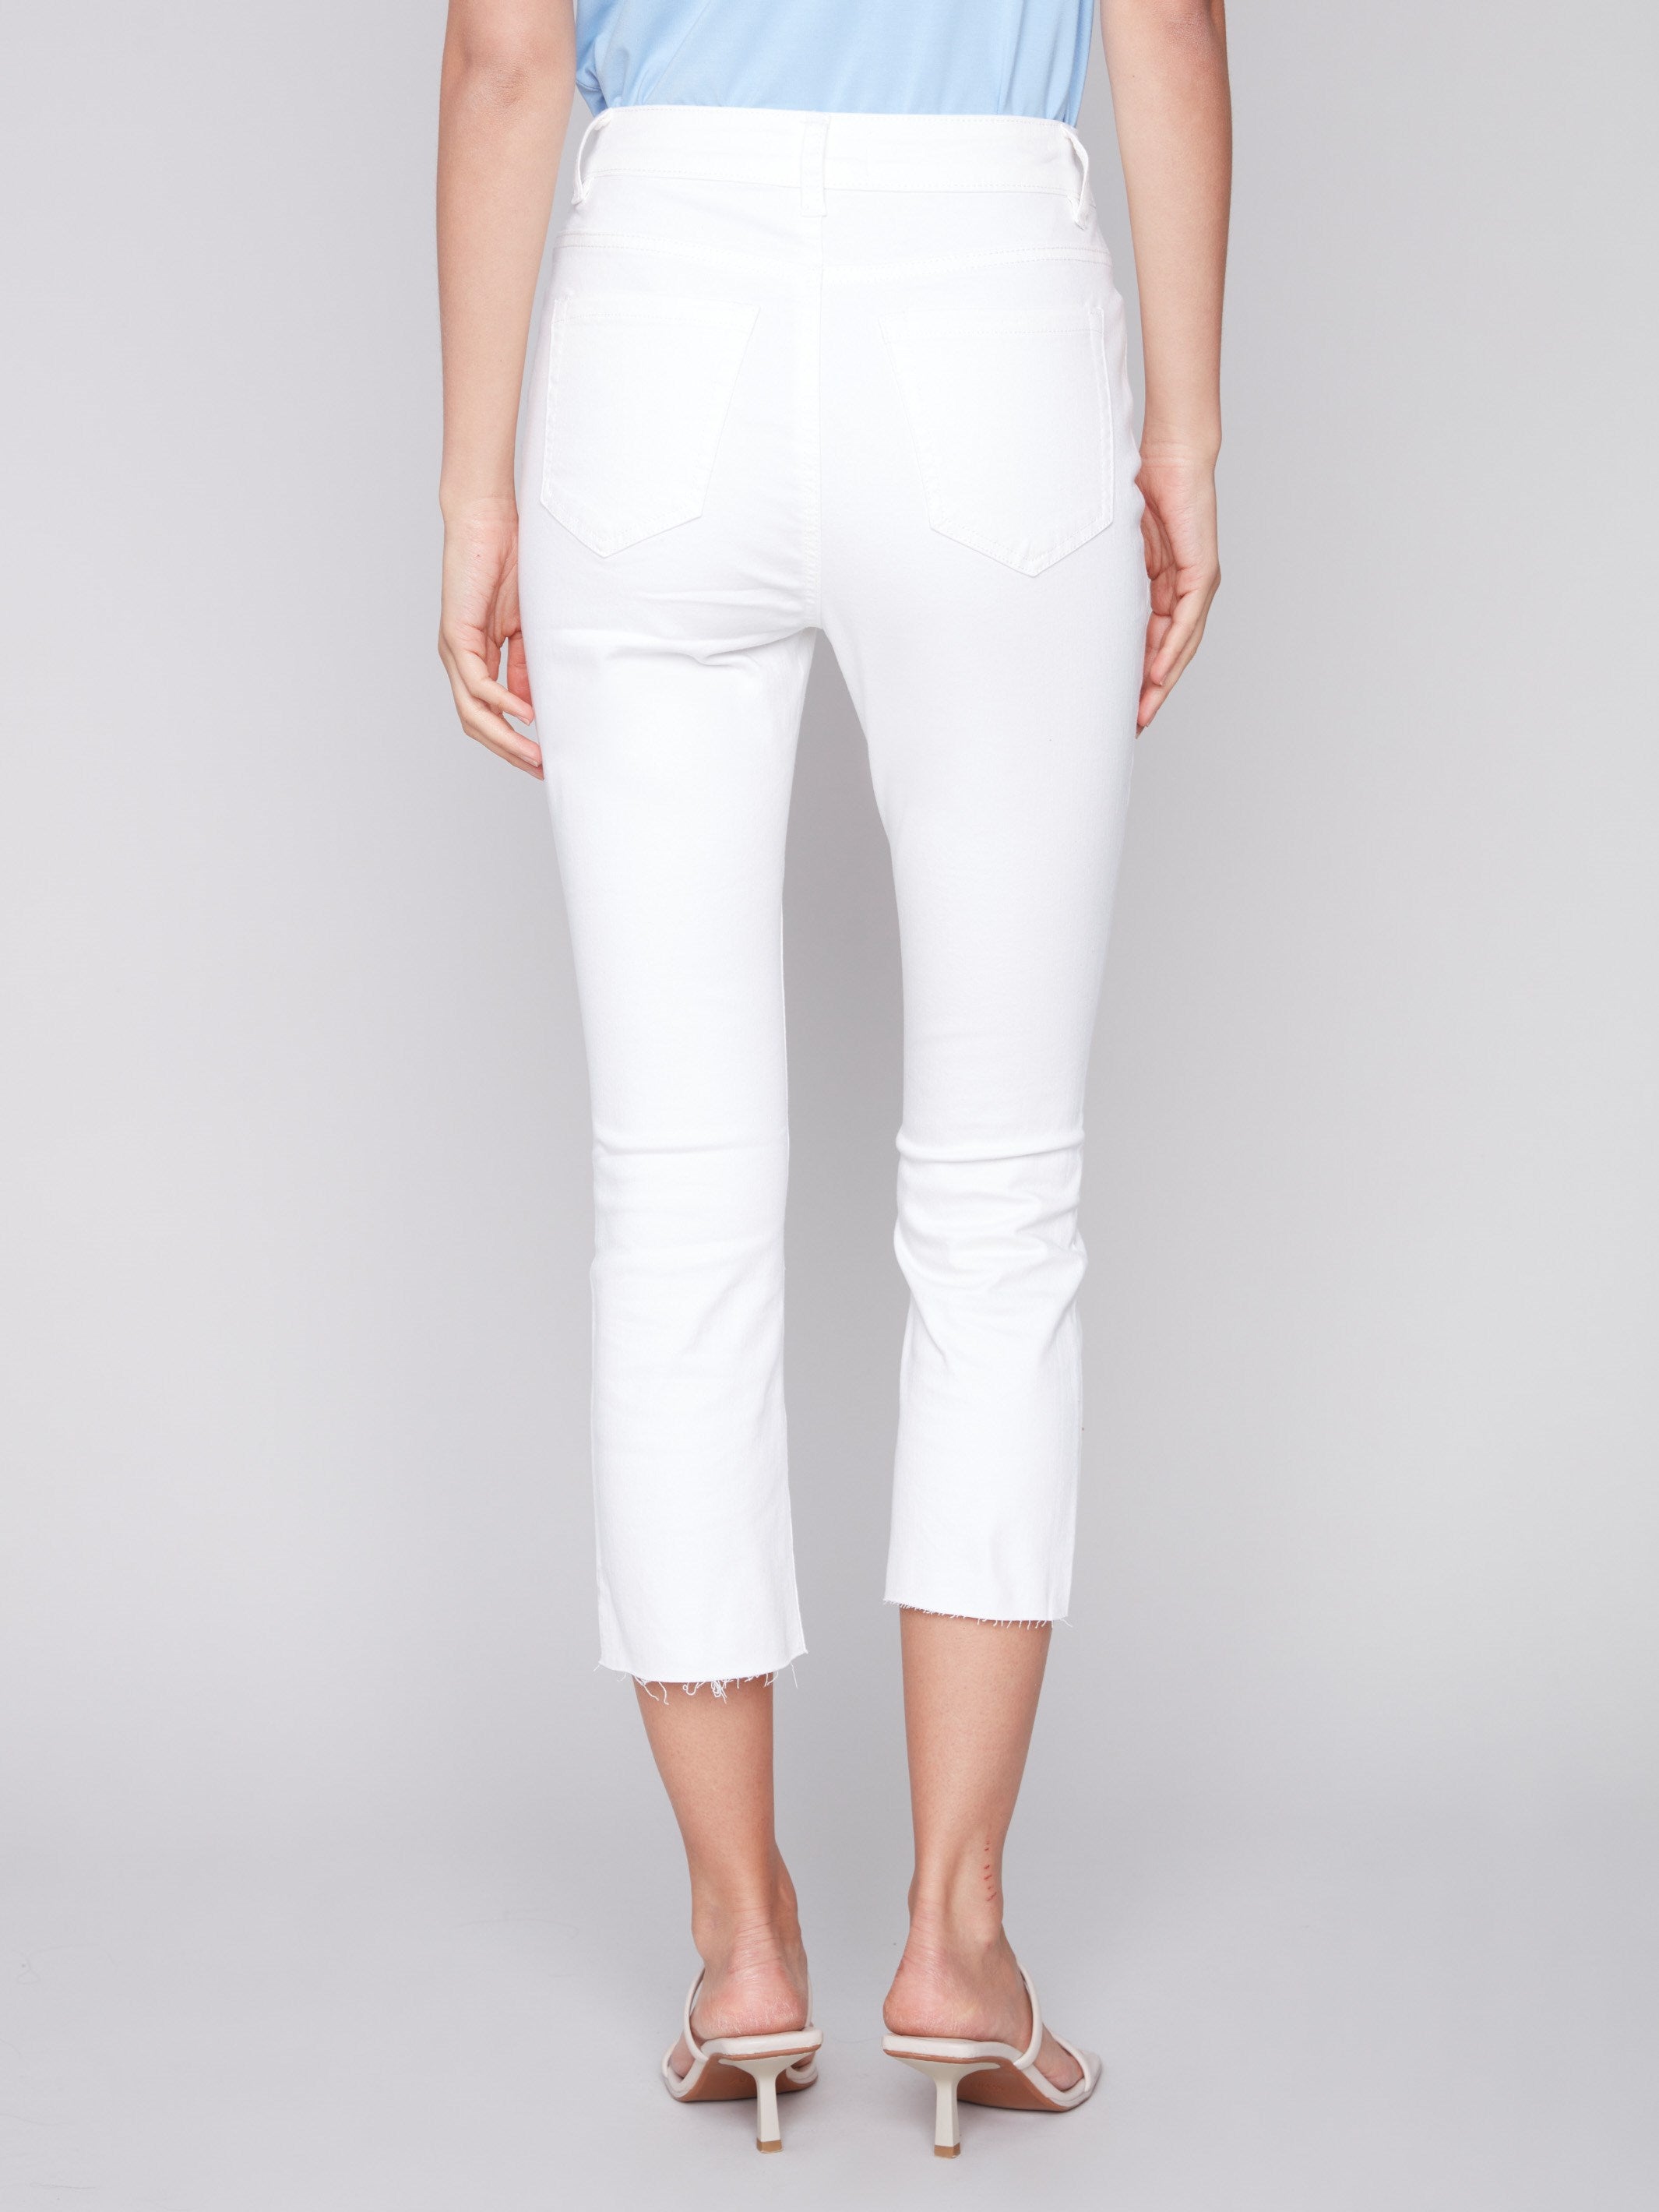 Charlie B Cropped Bootcut Twill Pants with Asymmetrical Hem - White - Image 8